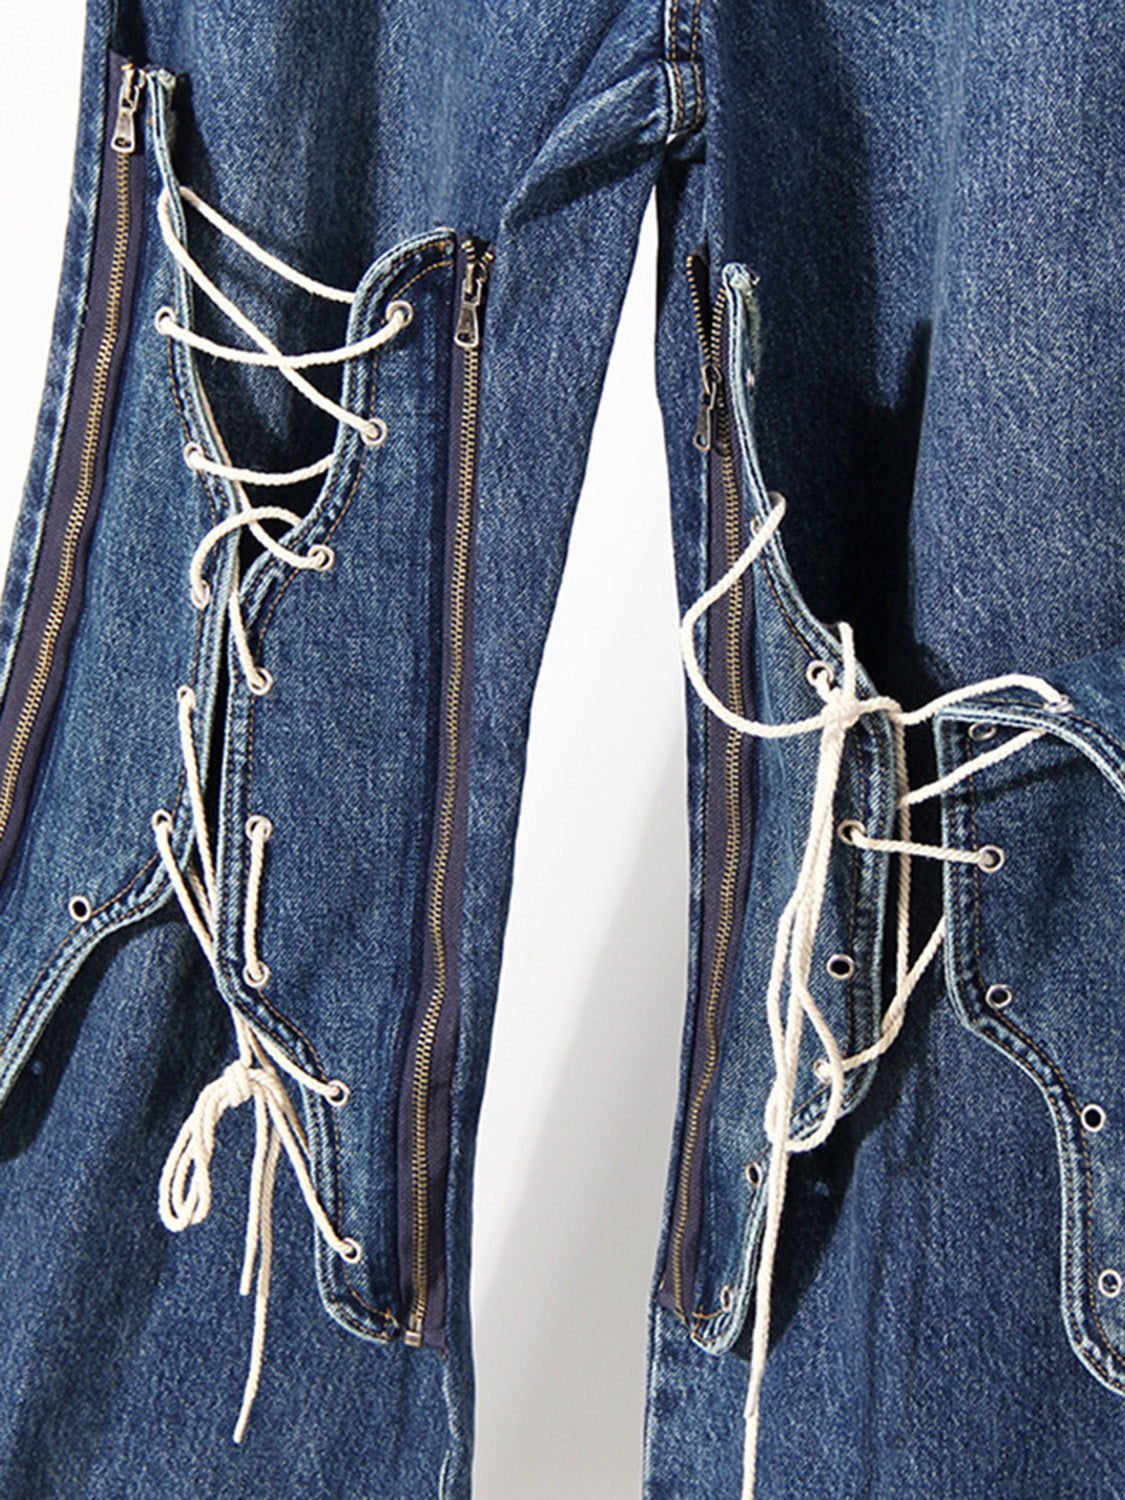 Lace Up Bootcut Jeans with Pockets BLUE ZONE PLANET